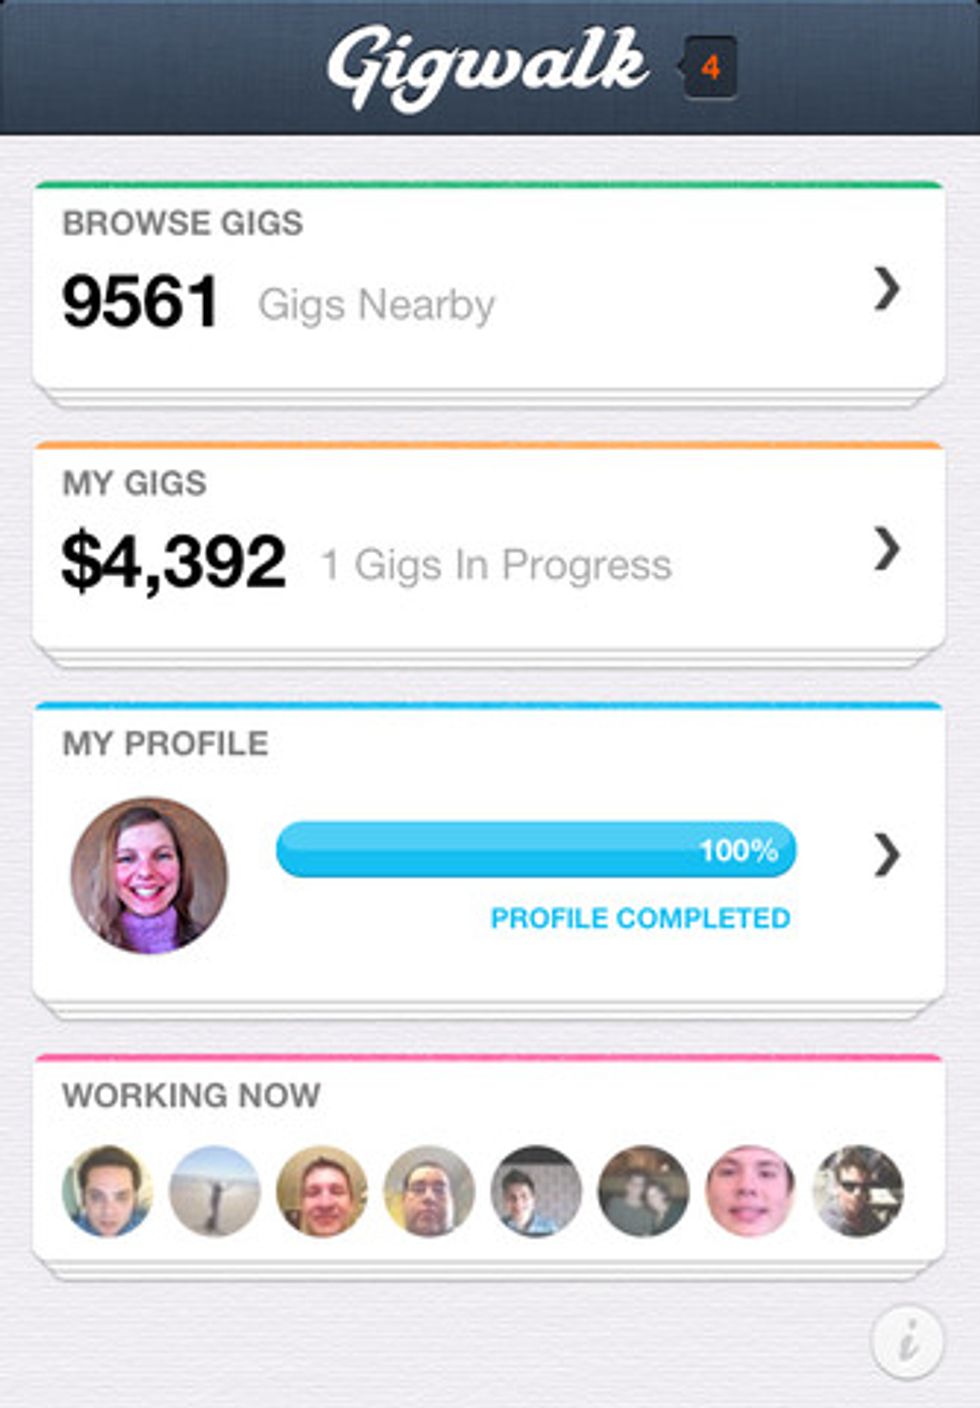 Gigwalk Helps You Find Short-Term Contract Work Fast On Your iPhone